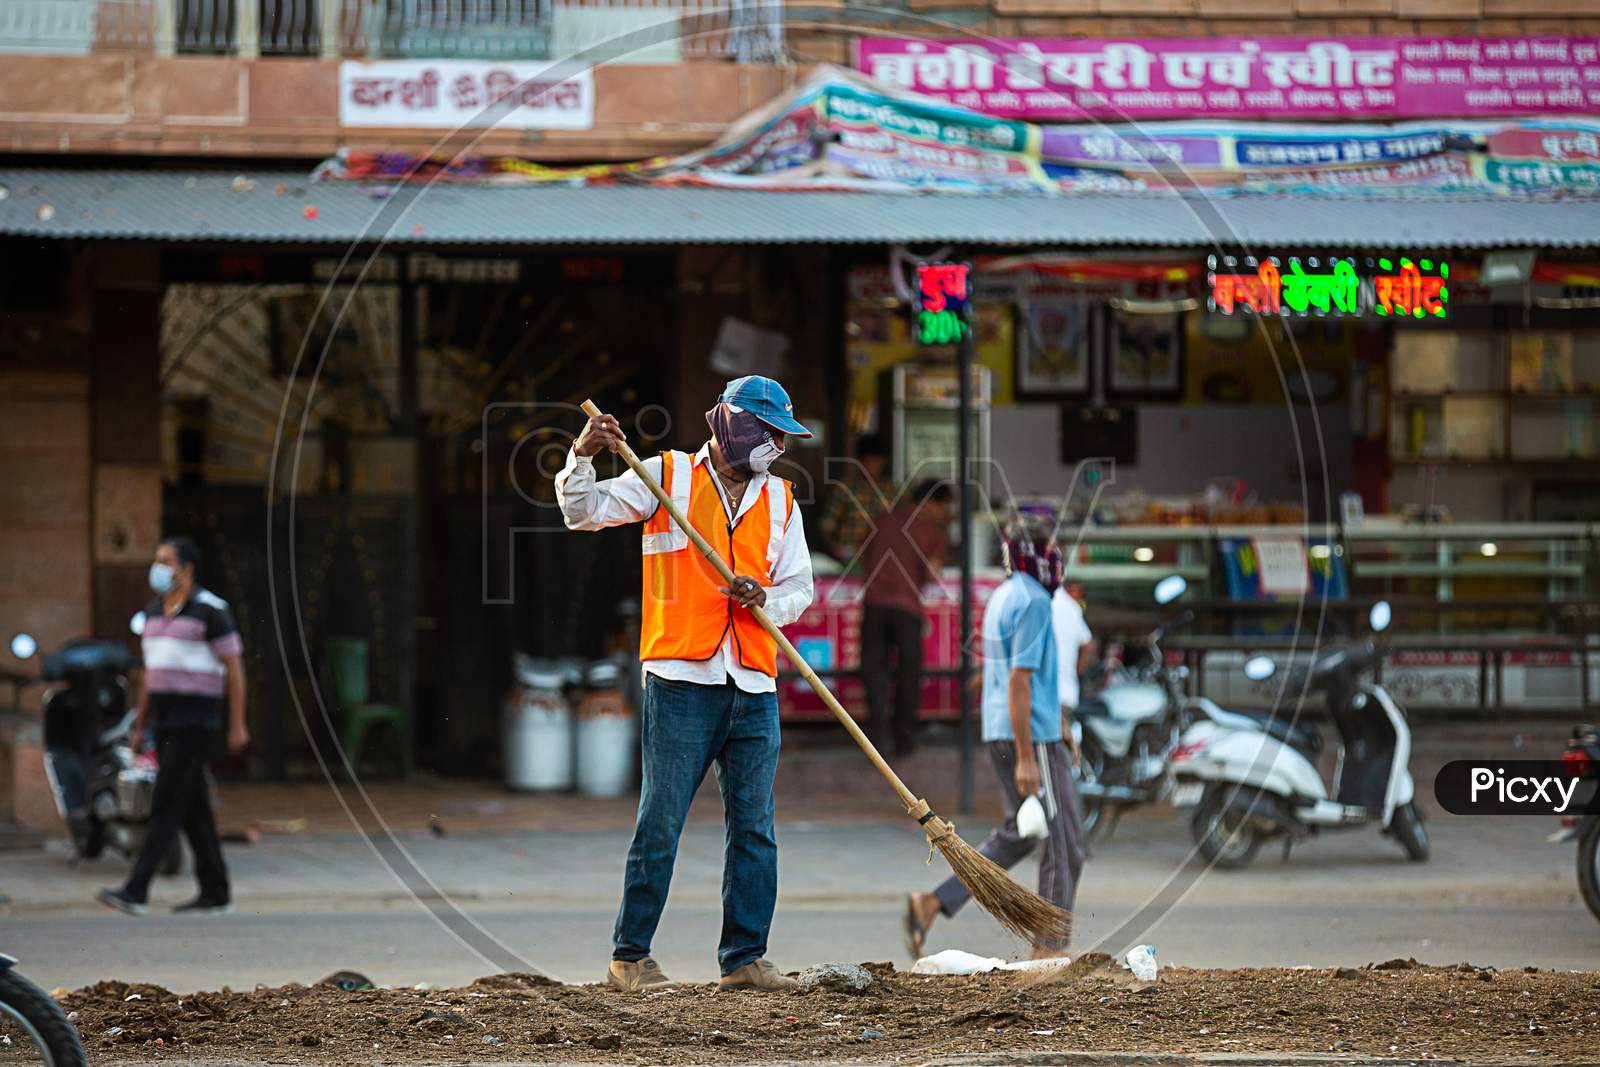 Jodhpur, Rajashtbn, India. 30 March 2020: A Man Sweeping The City Road In The Morning Manually With A Traditional Broom.Coronavirus, Covid-19 Situation.